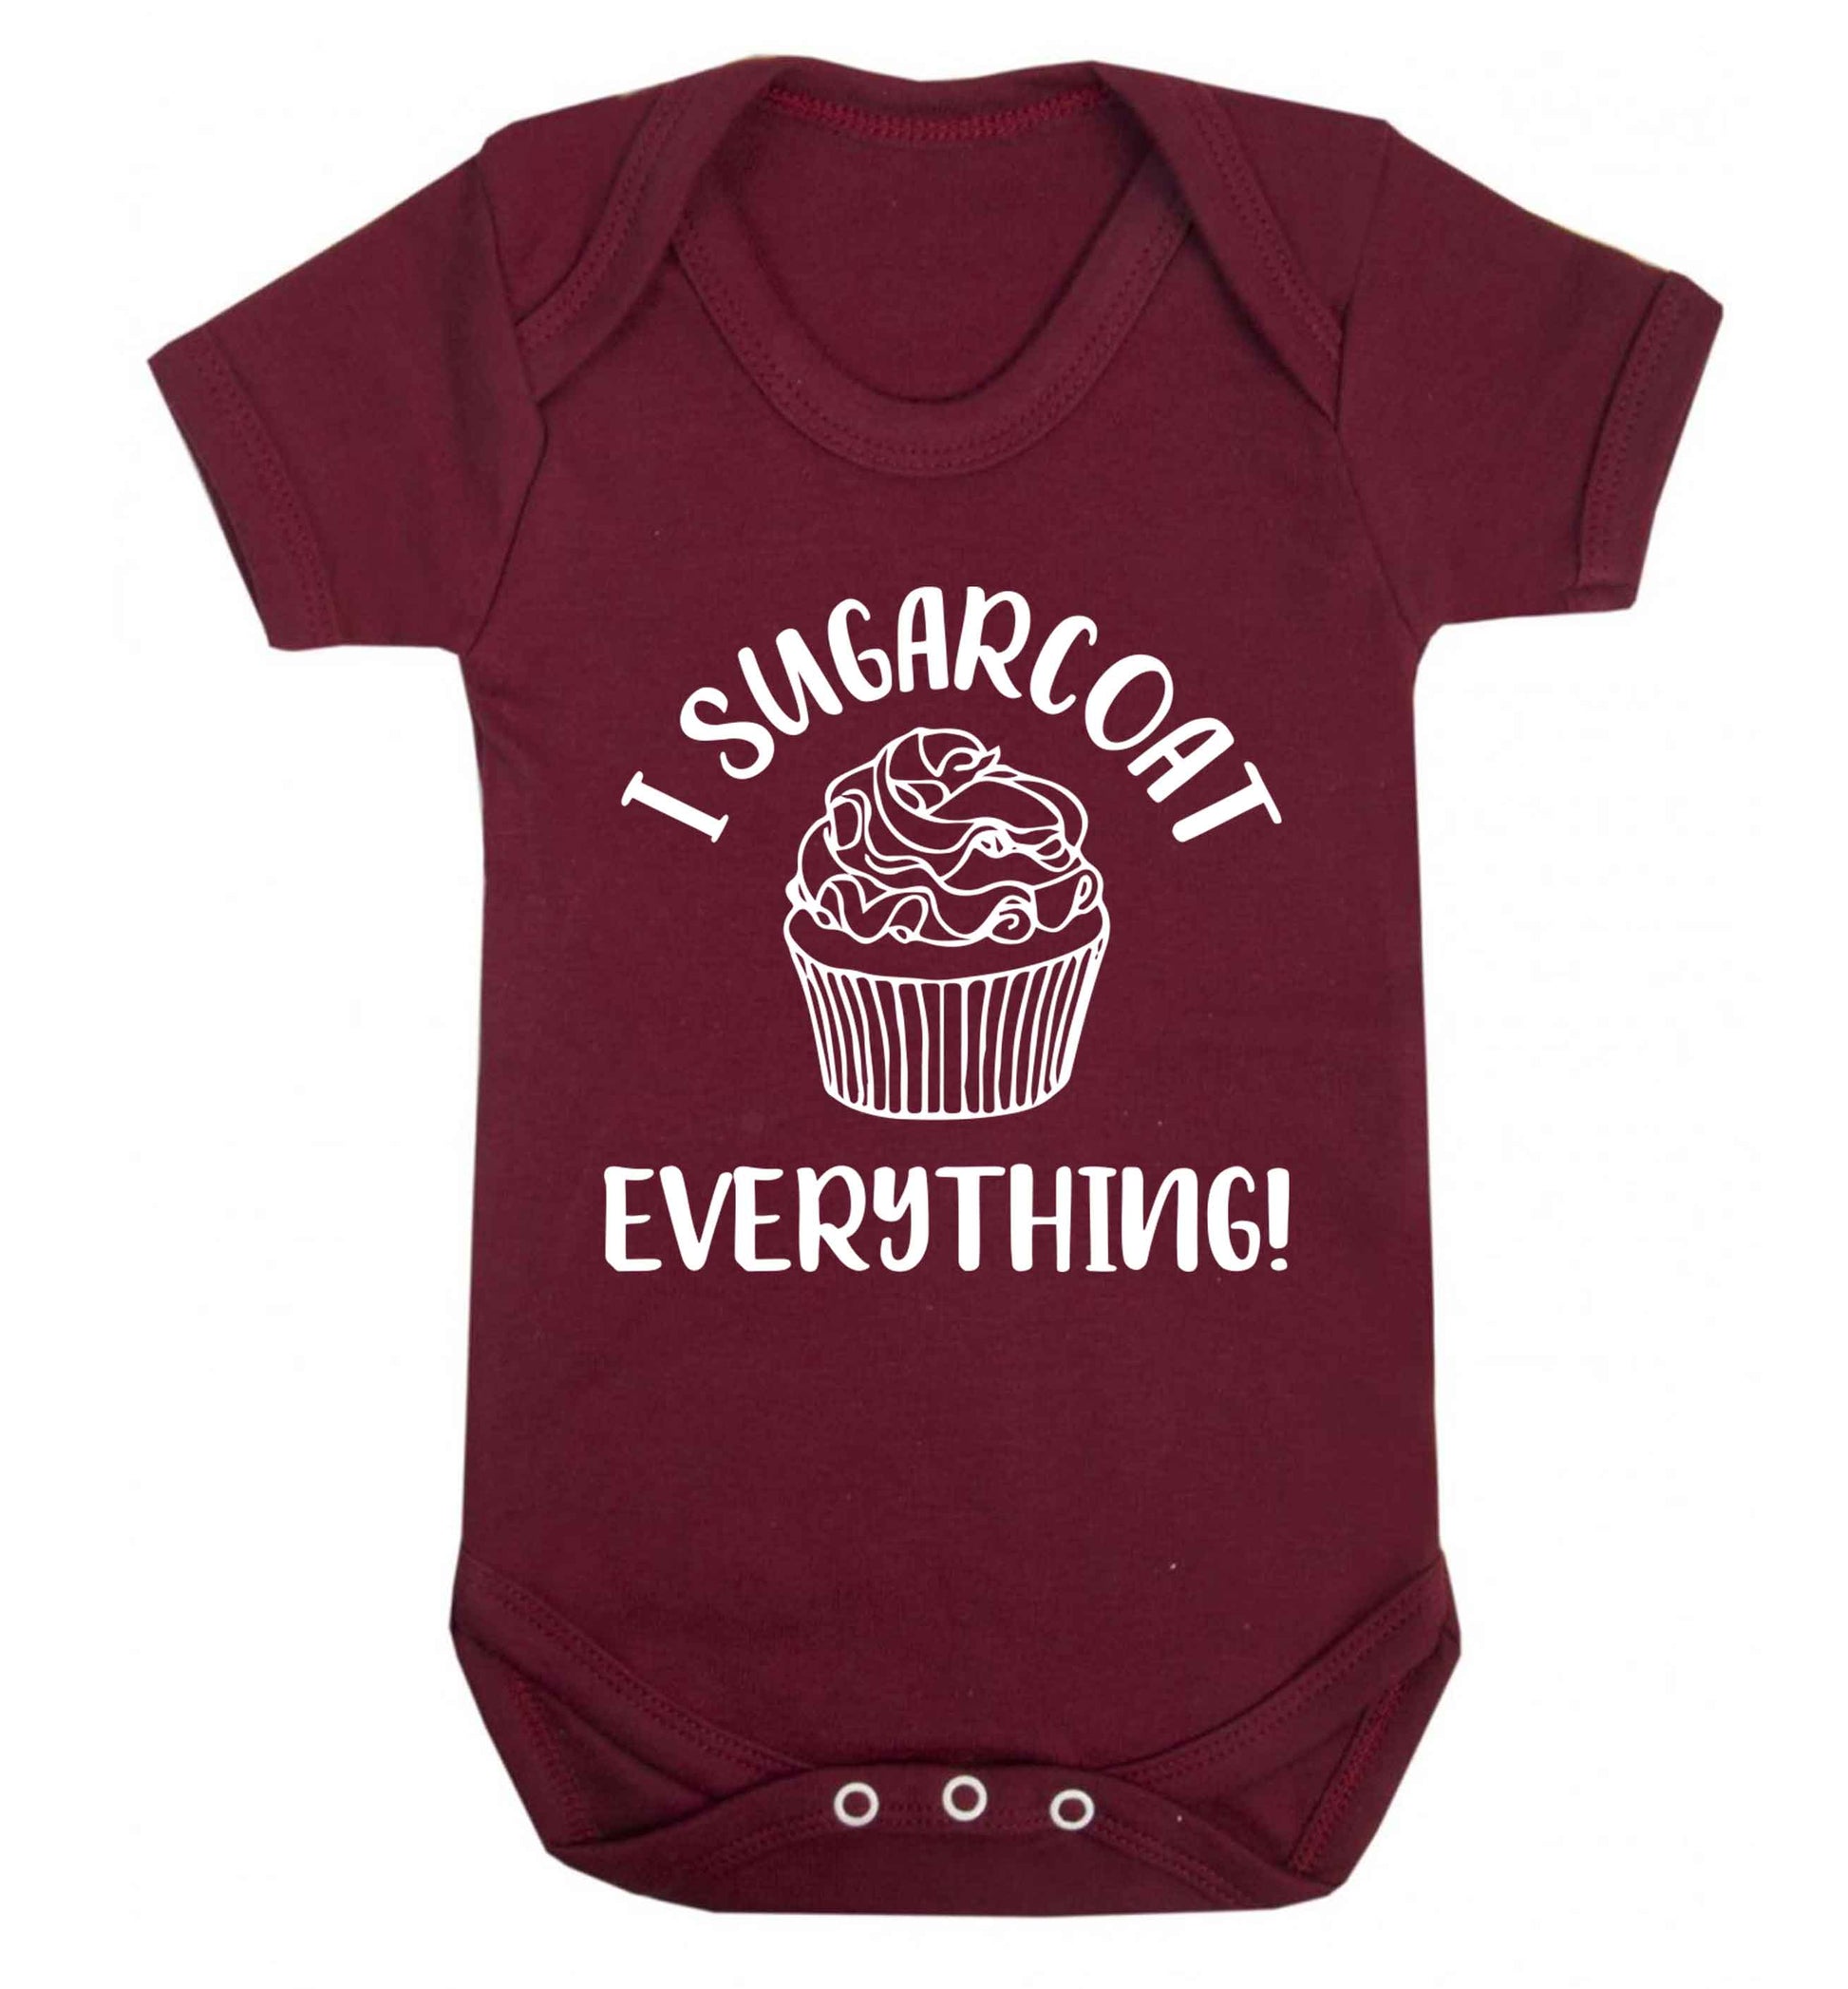 I sugarcoat everything Baby Vest maroon 18-24 months